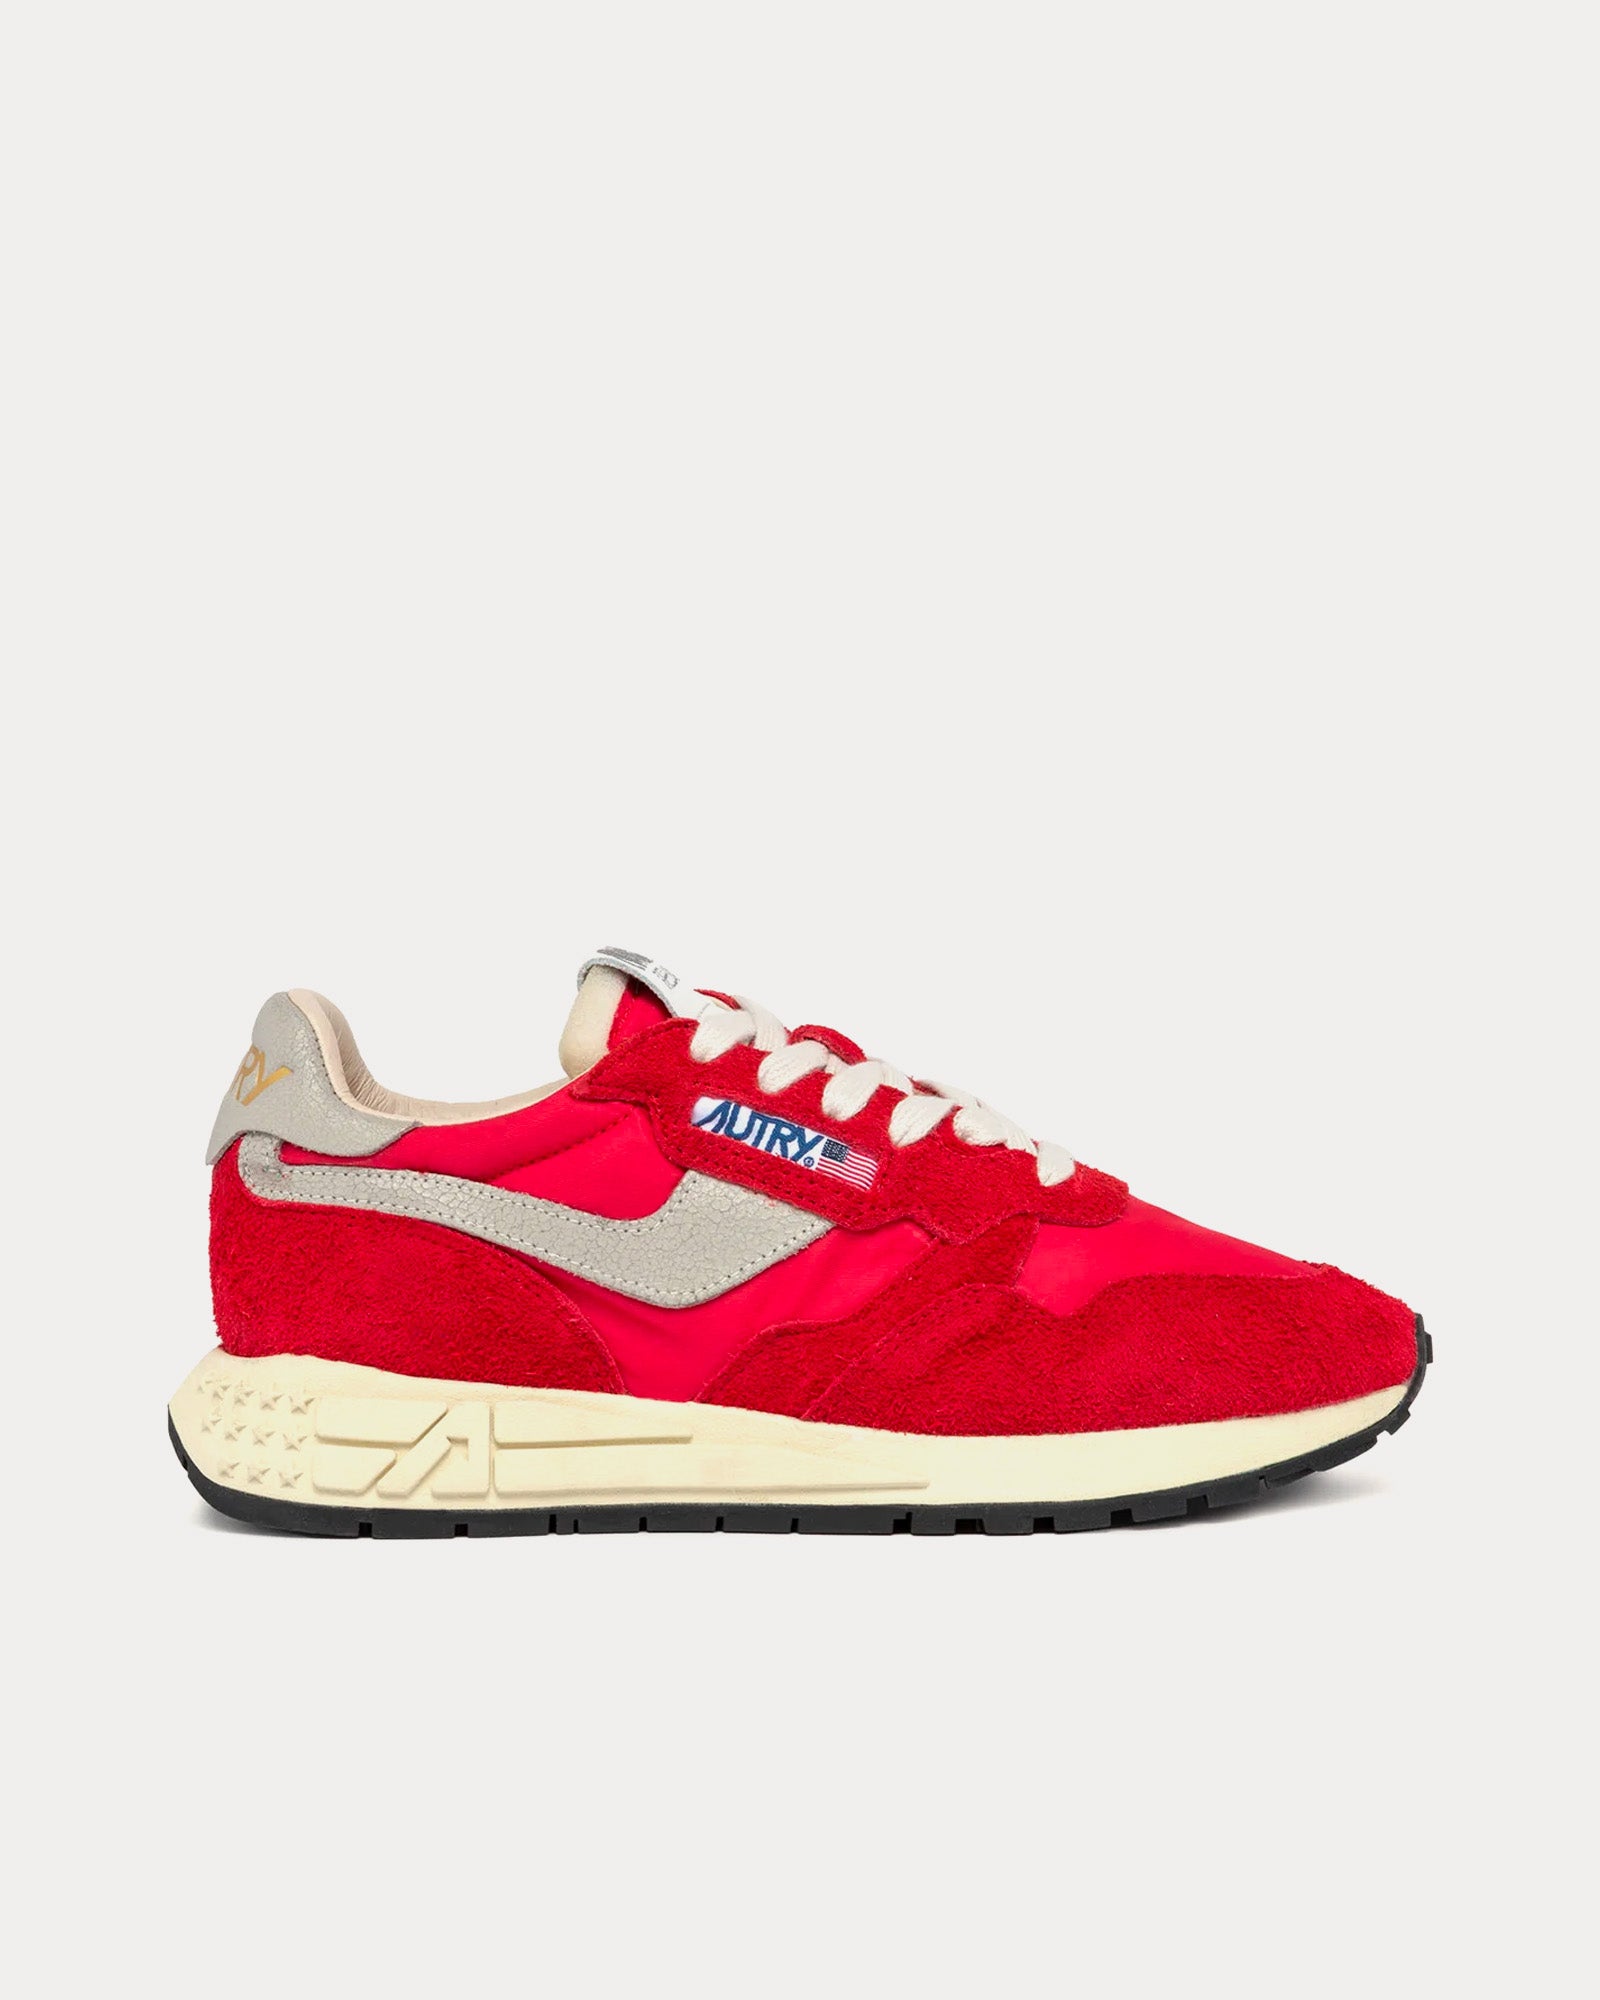 Autry - Reelwind Nylon & Suede Red Low Top Sneakers